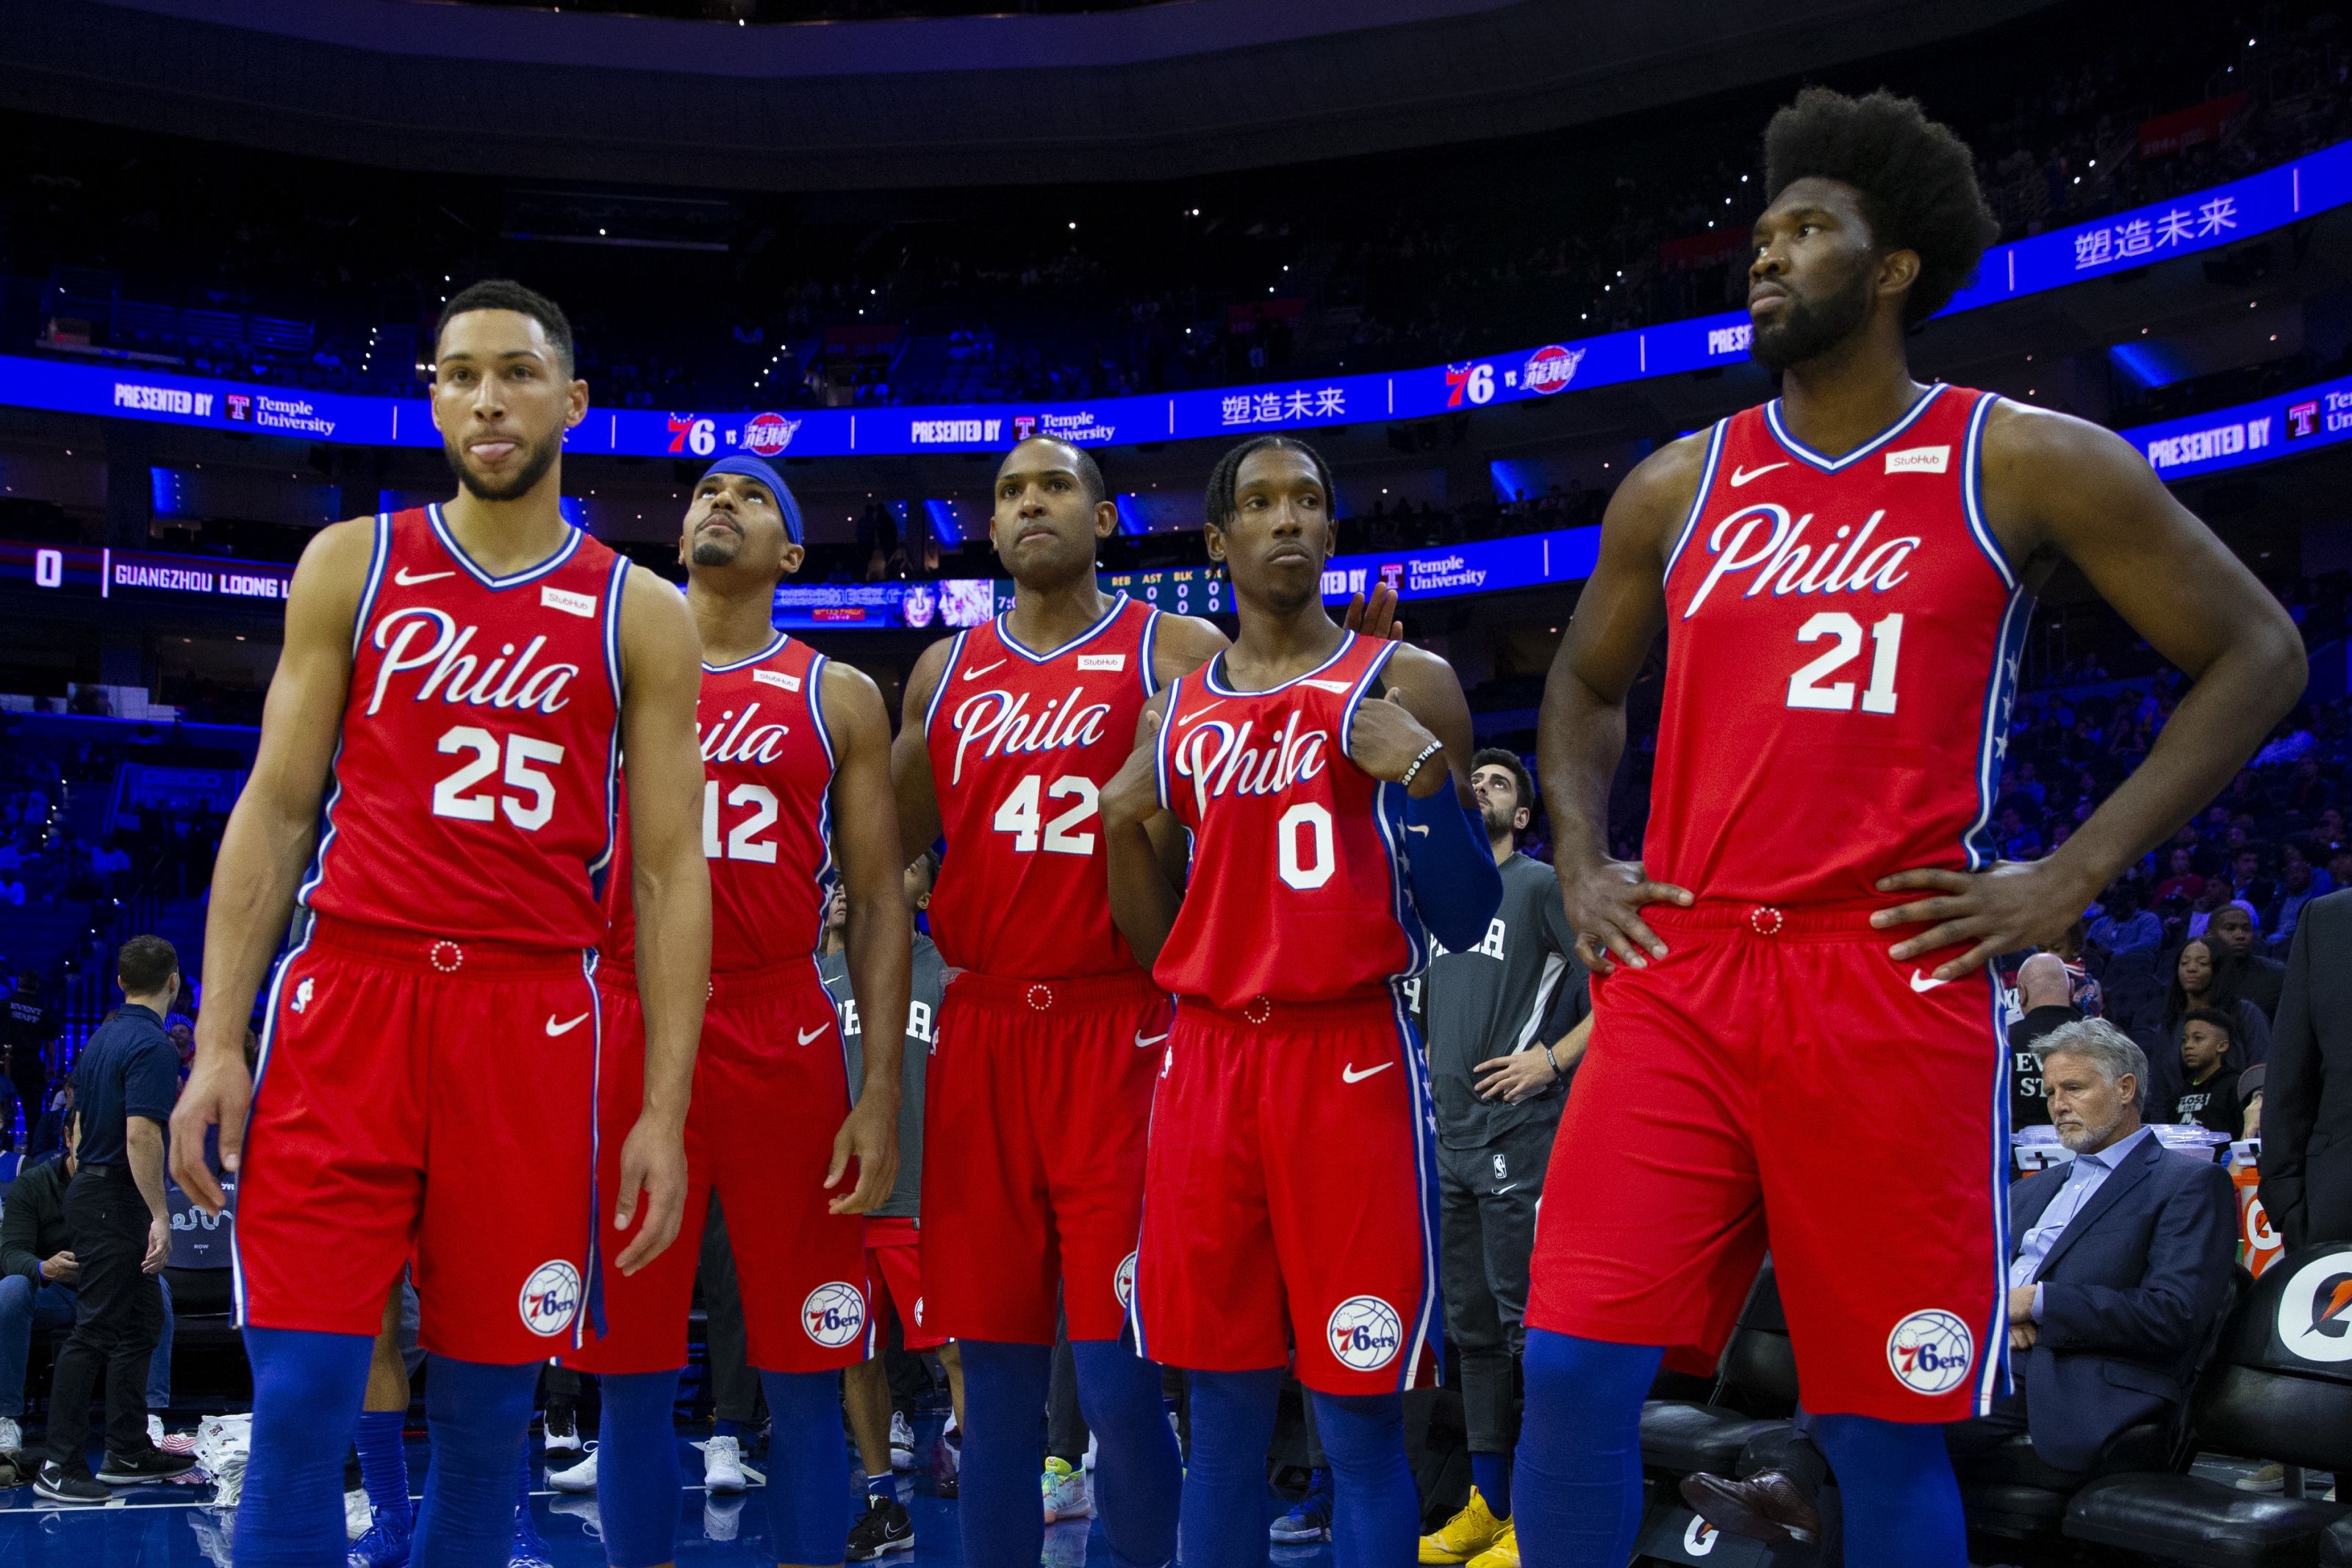 philadelphia-76ers-top-espn-s-league-pass-rankings-for-second-straight-year